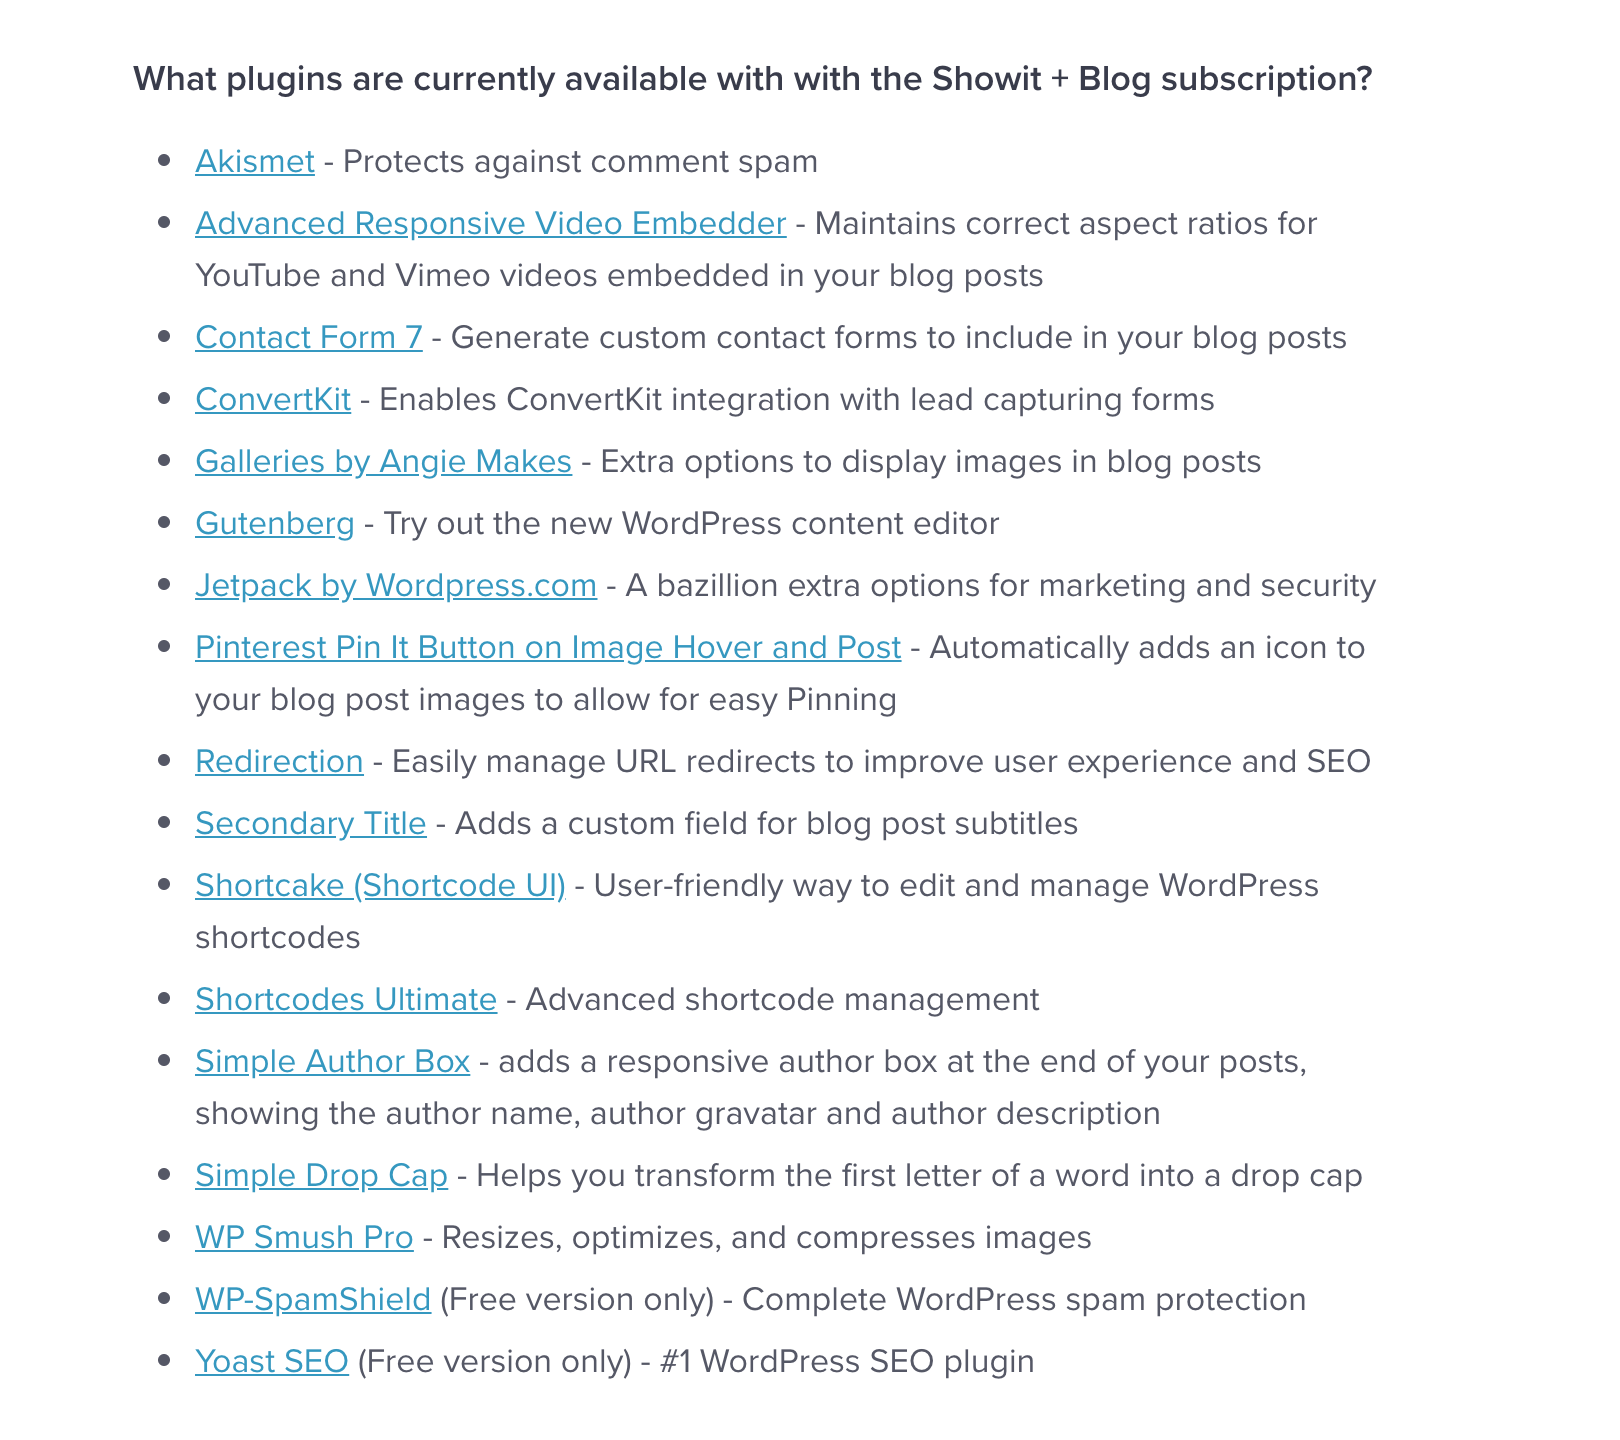 List of plugins to use with Showit's basic blog pricing tier